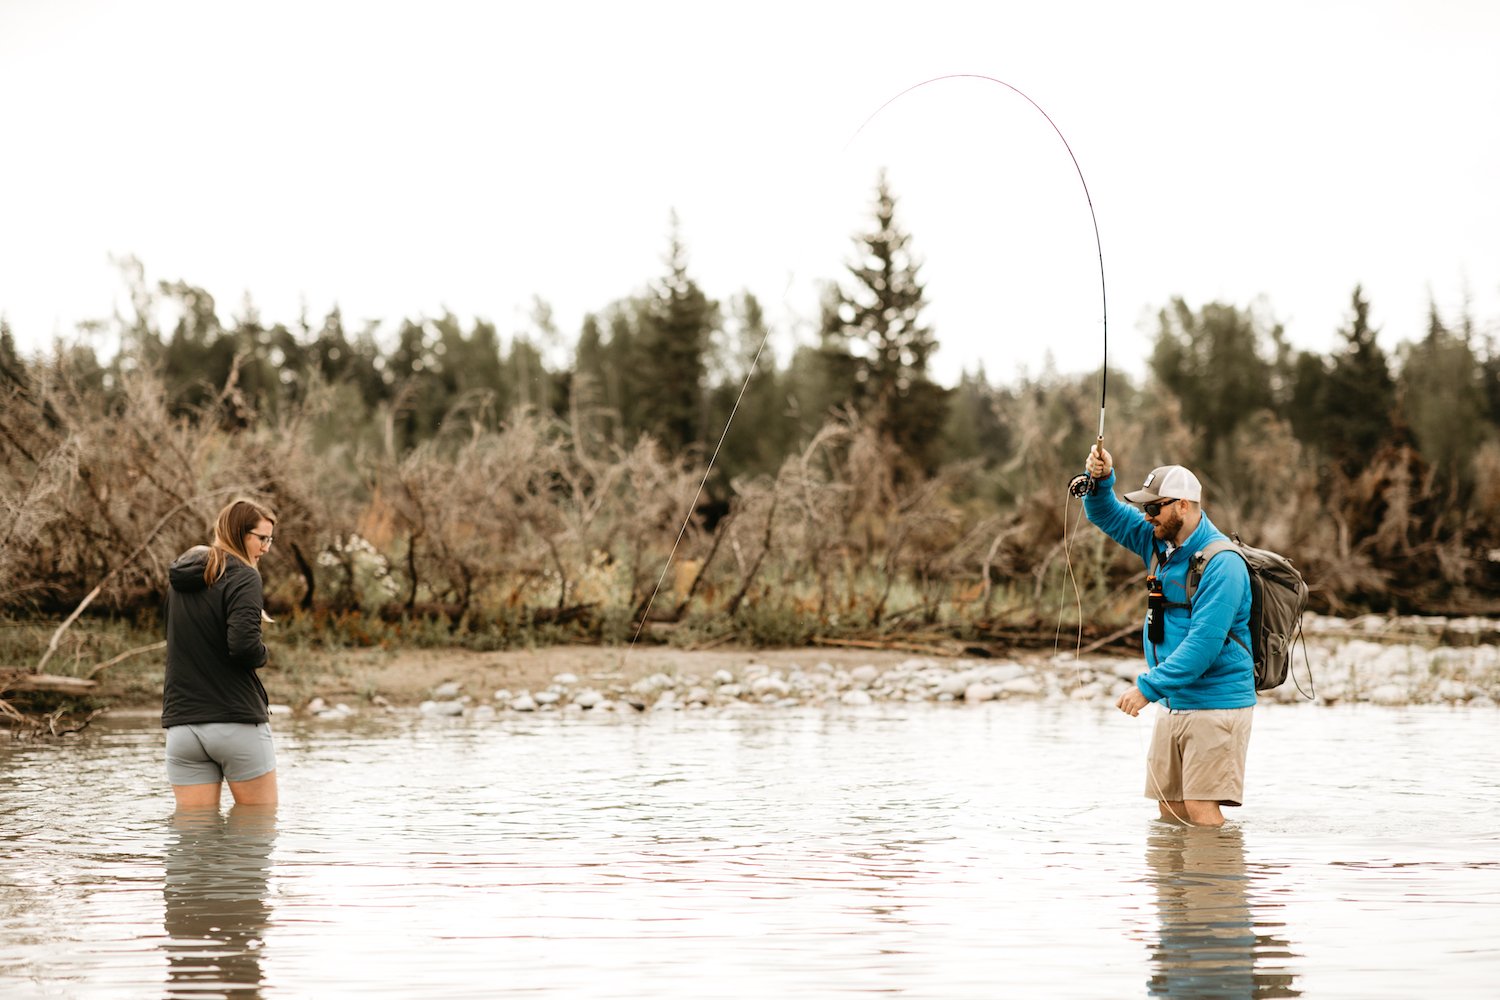 Fly Fishing Couples Portraits • Adventurous Wyoming Elopement — Nicole  Daacke Photography  Adventure Elopements + Wedding Photographer for  National Parks and other travels destinations